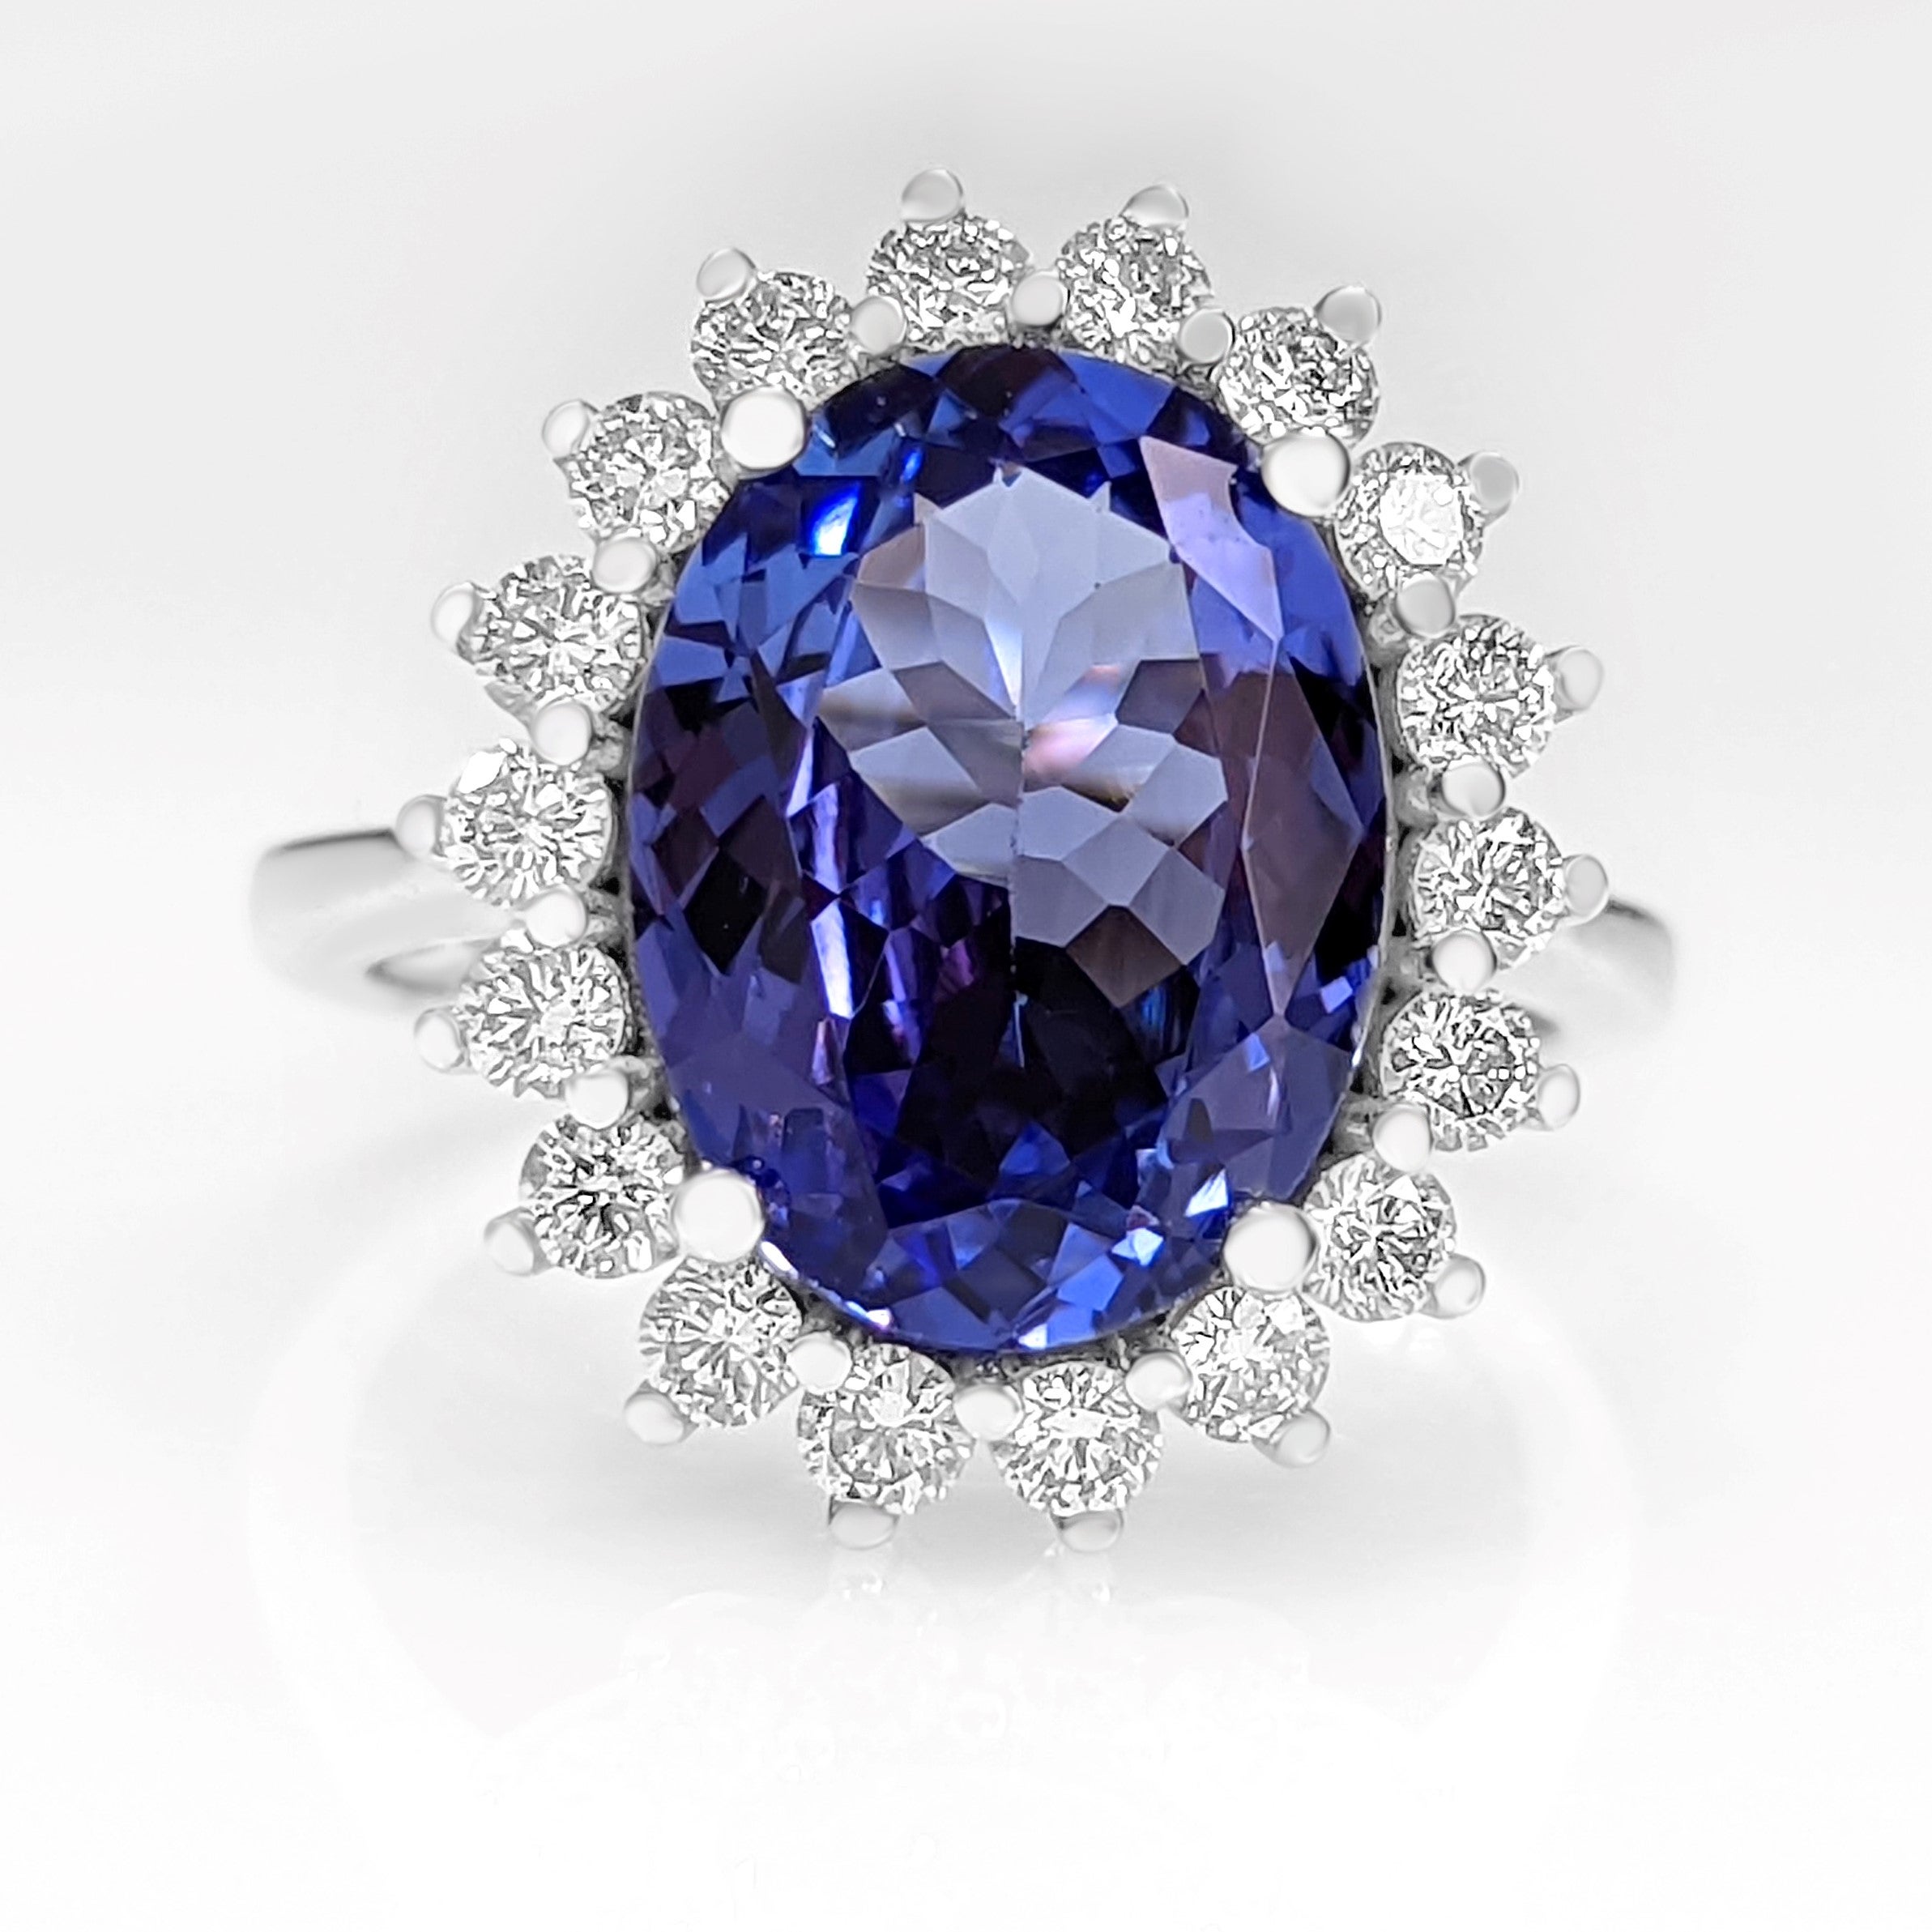 Tanzanite is an extremely rare gemstone, found in a single location in the world, at the foothills of mount Kilimanjaro in Tanzania. As this single source is expected to drain out in 20 years from now, Tanzanite is a perfect gem for investment as